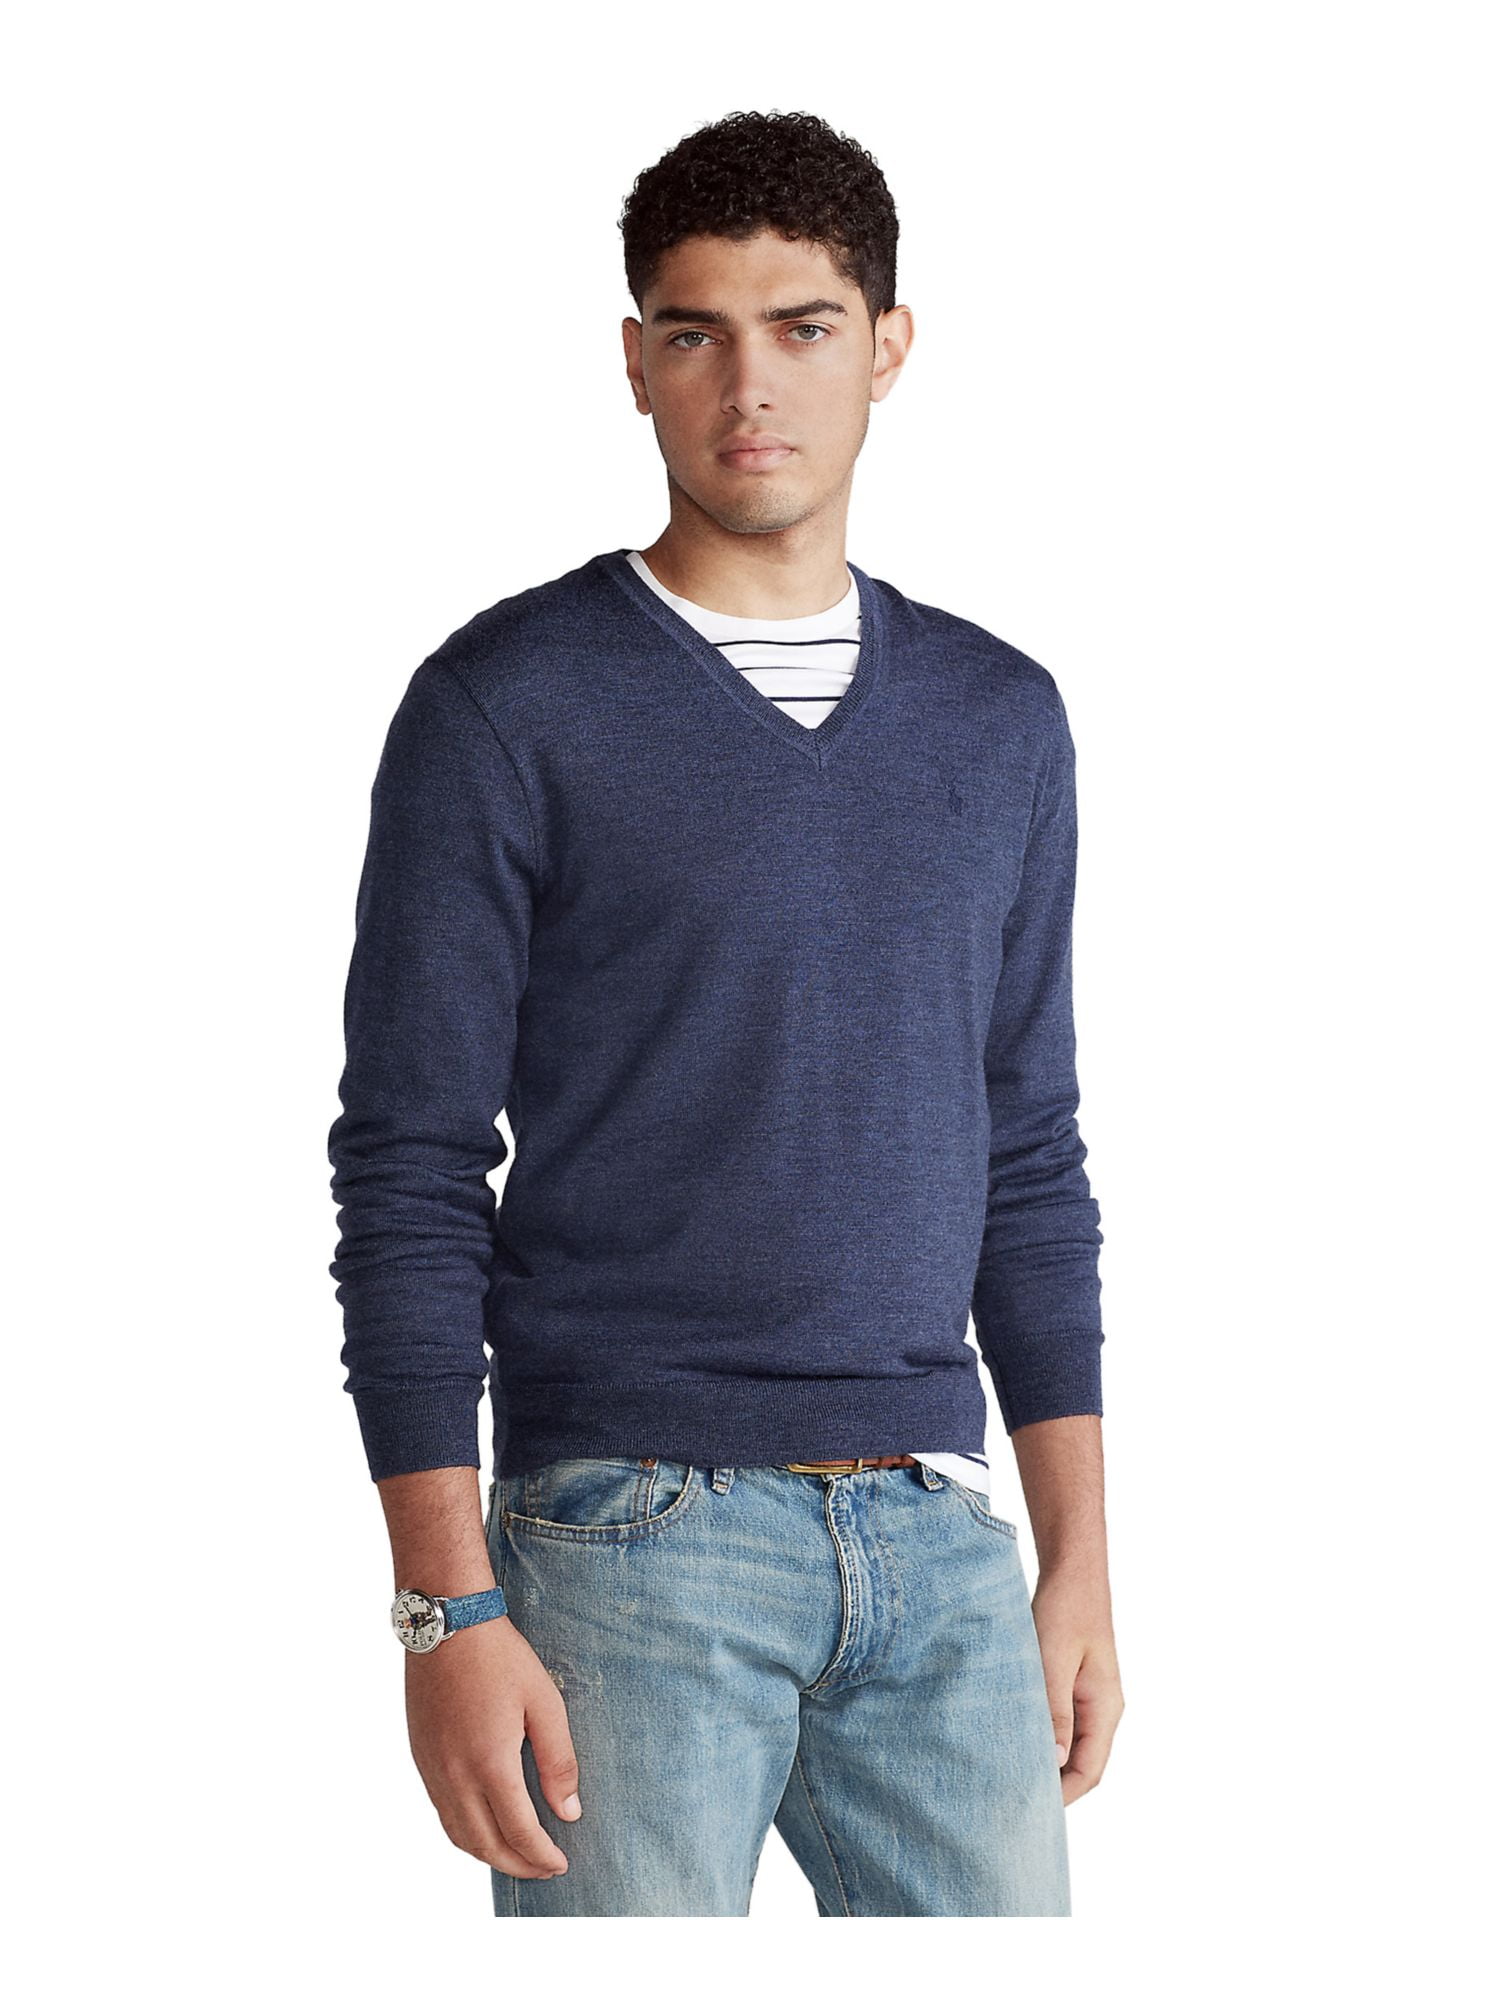 POLO RALPH LAUREN Mens Navy Crew Neck Classic Fit Knit Cardigan Sweater ...